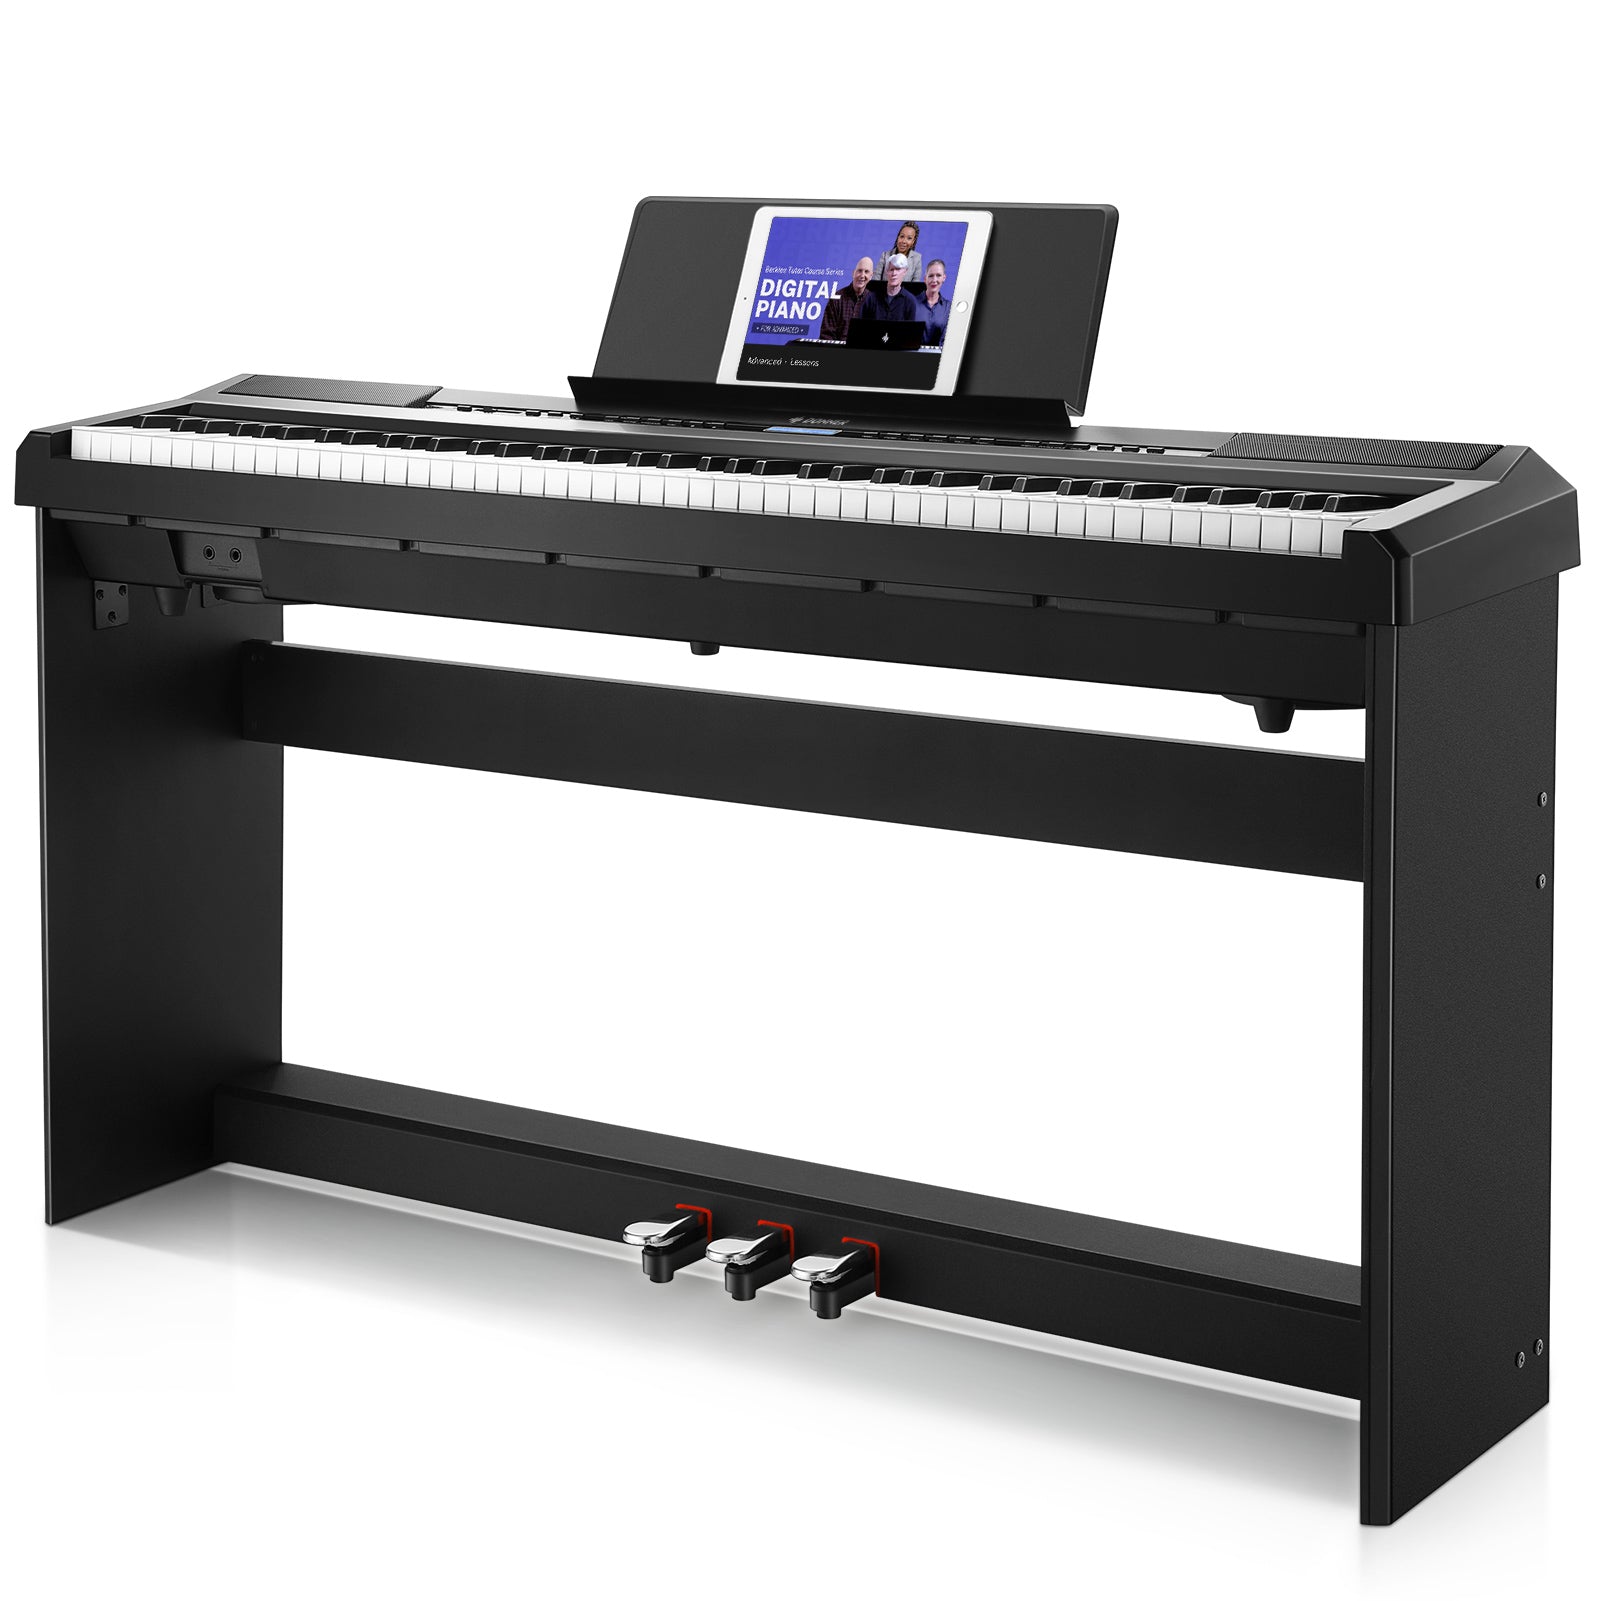 Donner DEP-20 88 Key Weighted Digital Piano with Furniture Stand